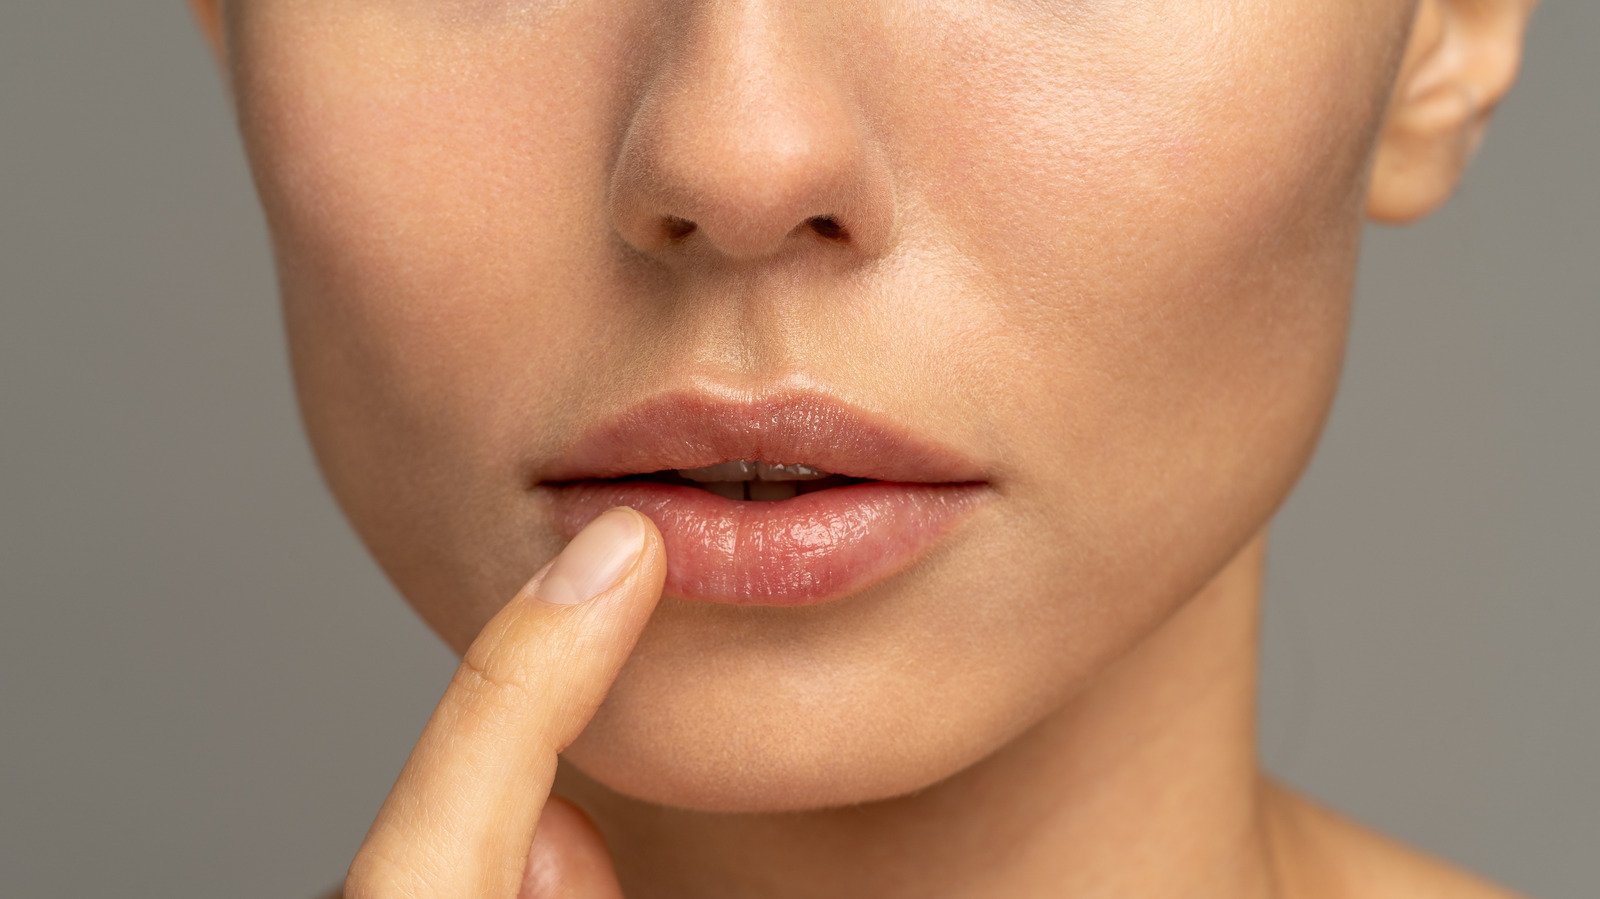 Can You Really Use Olive Oil To Treat Chapped Lips? - Glam